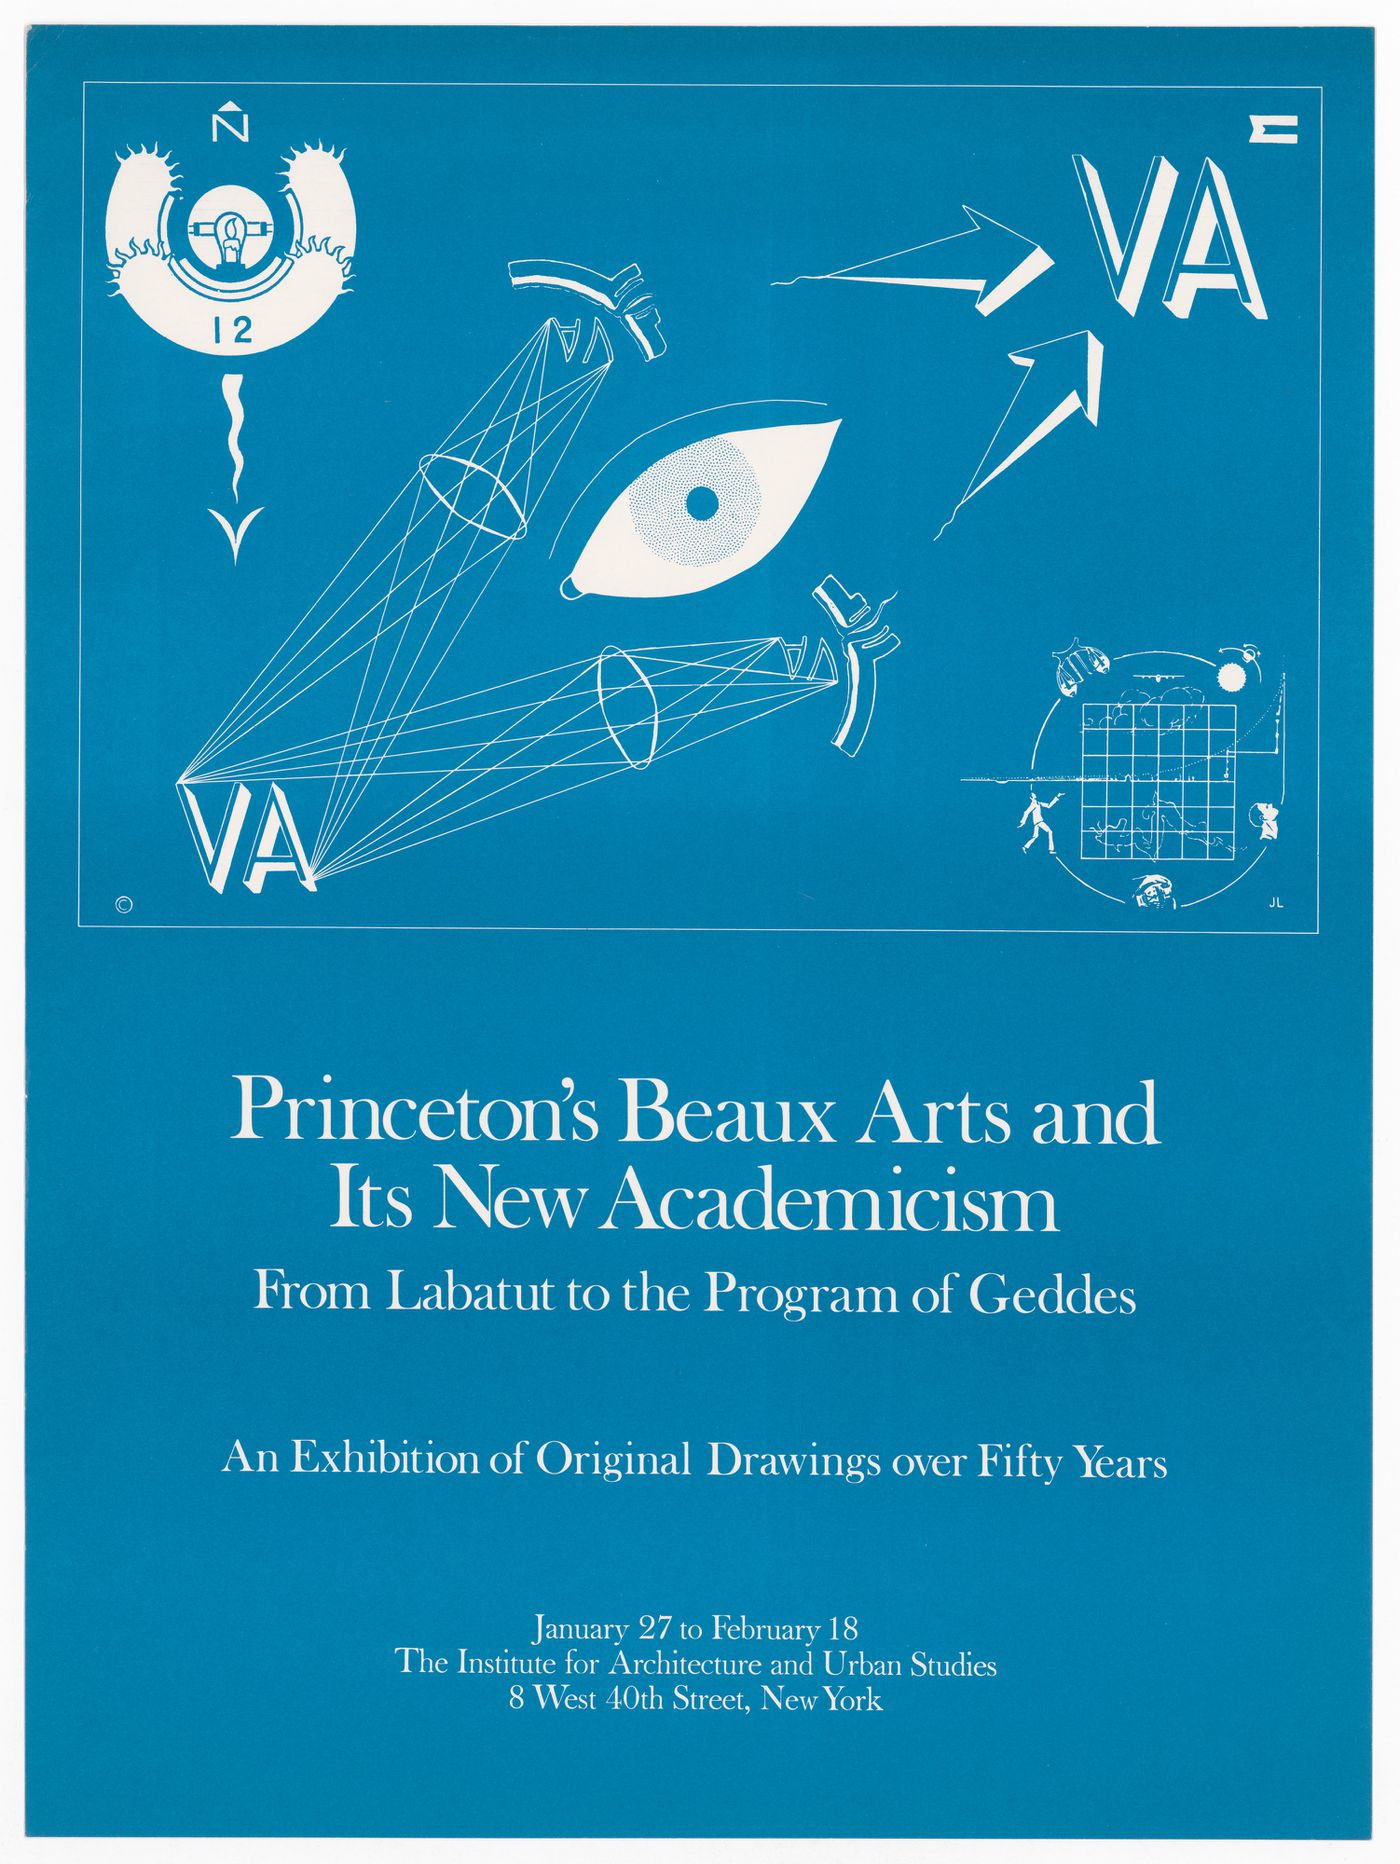 Poster for the exhibition Princeton's Beaux-Arts and its new Academicism